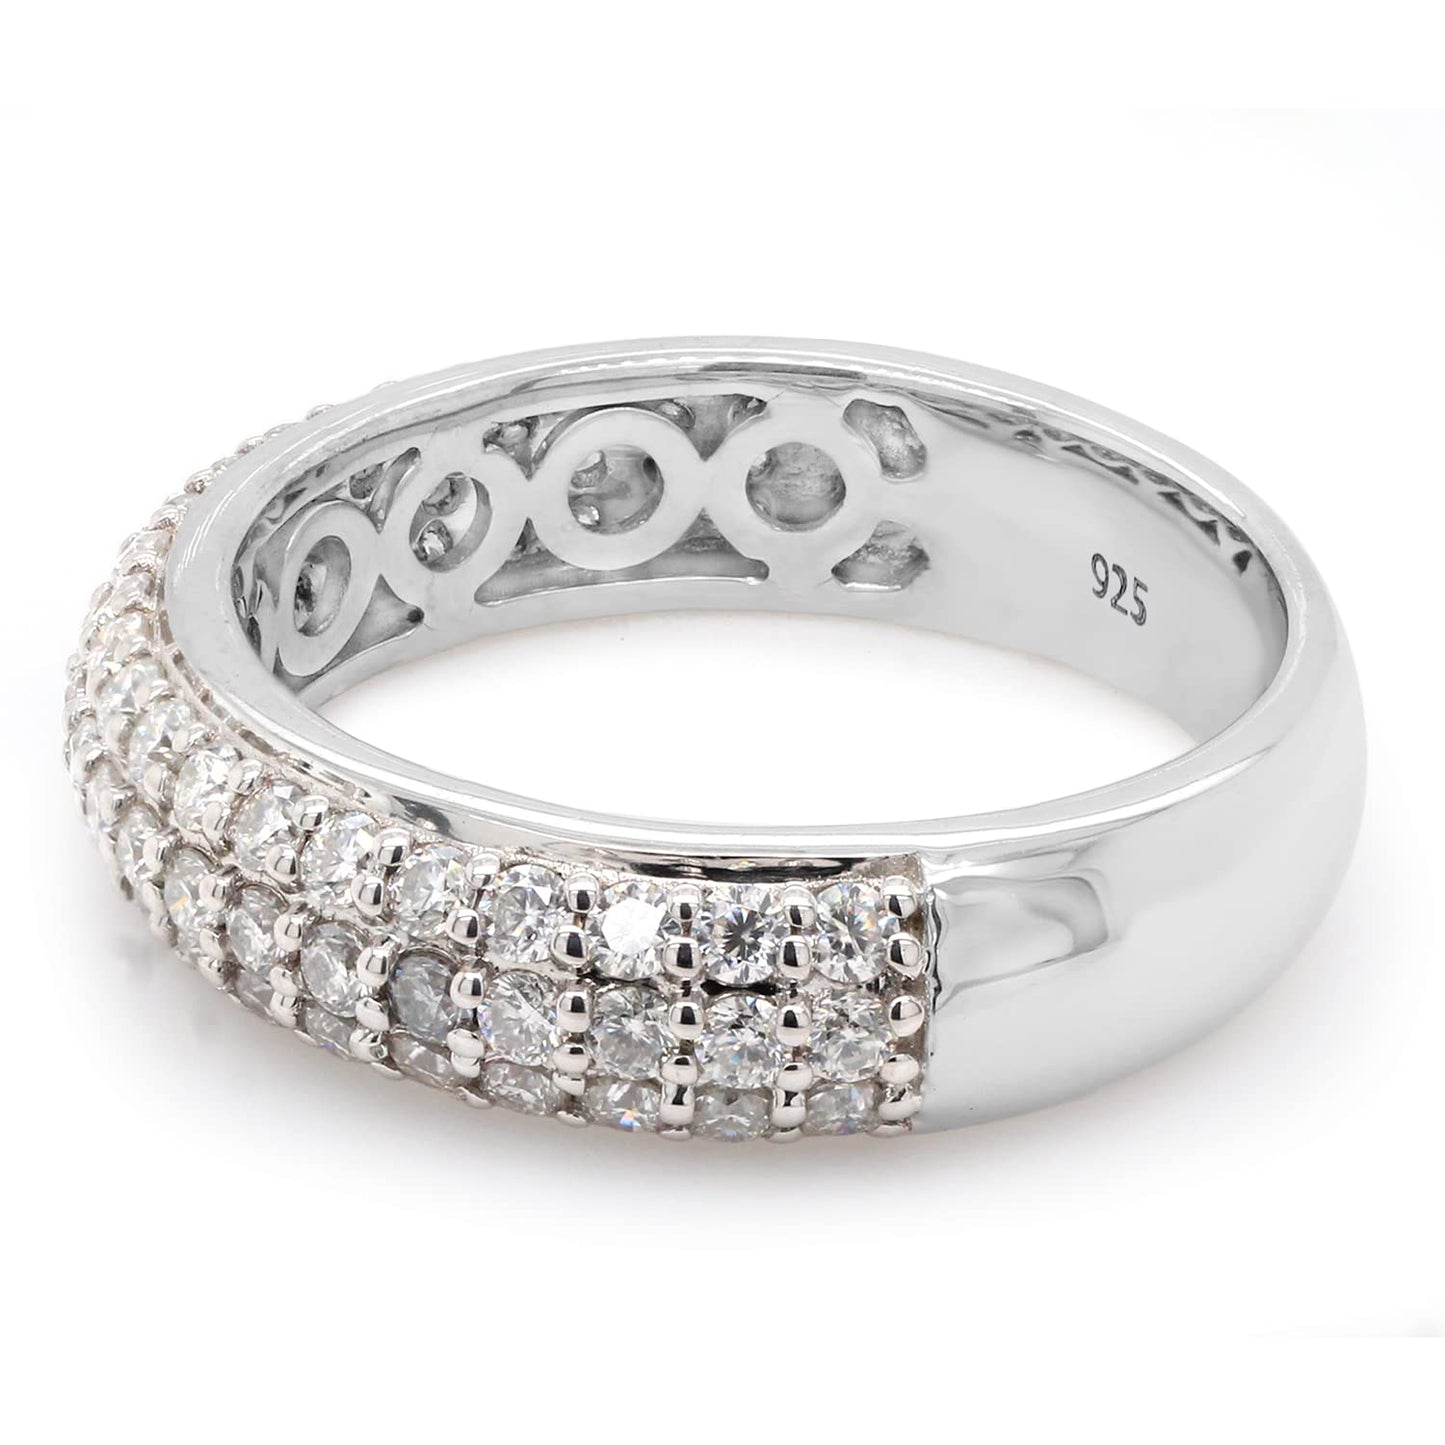 1.00 Carat Round Cut Lab Created Moissanite Diamond Three Row Eternity Wedding Band Ring In 925 Sterling Silver